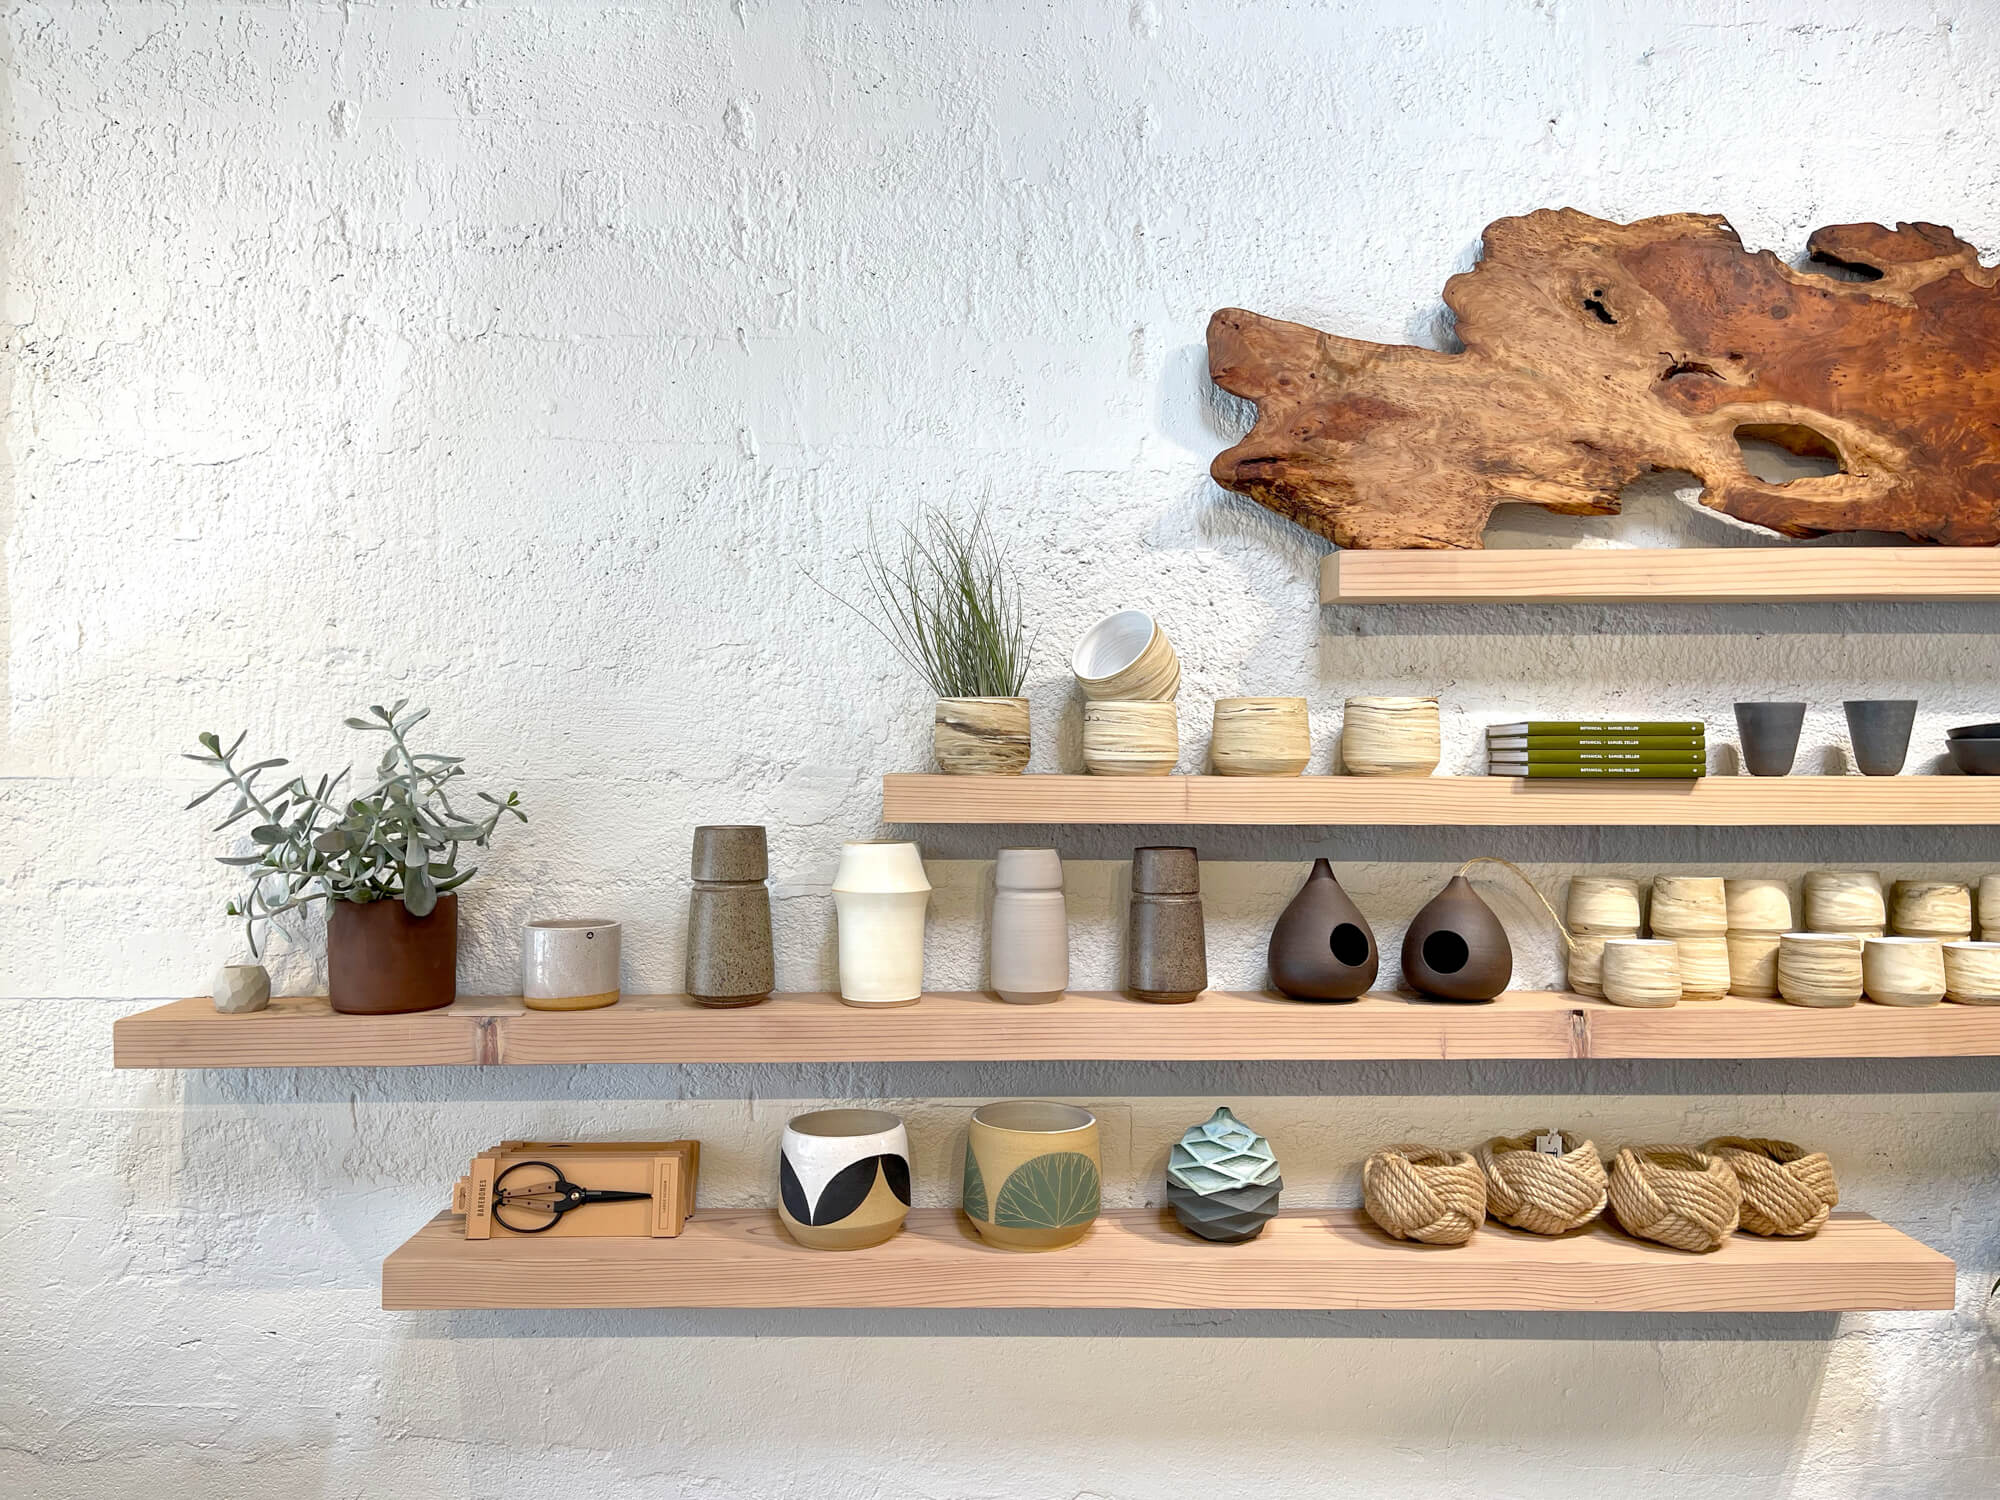 Redwood shelves displaying pottery and other small artifacts.